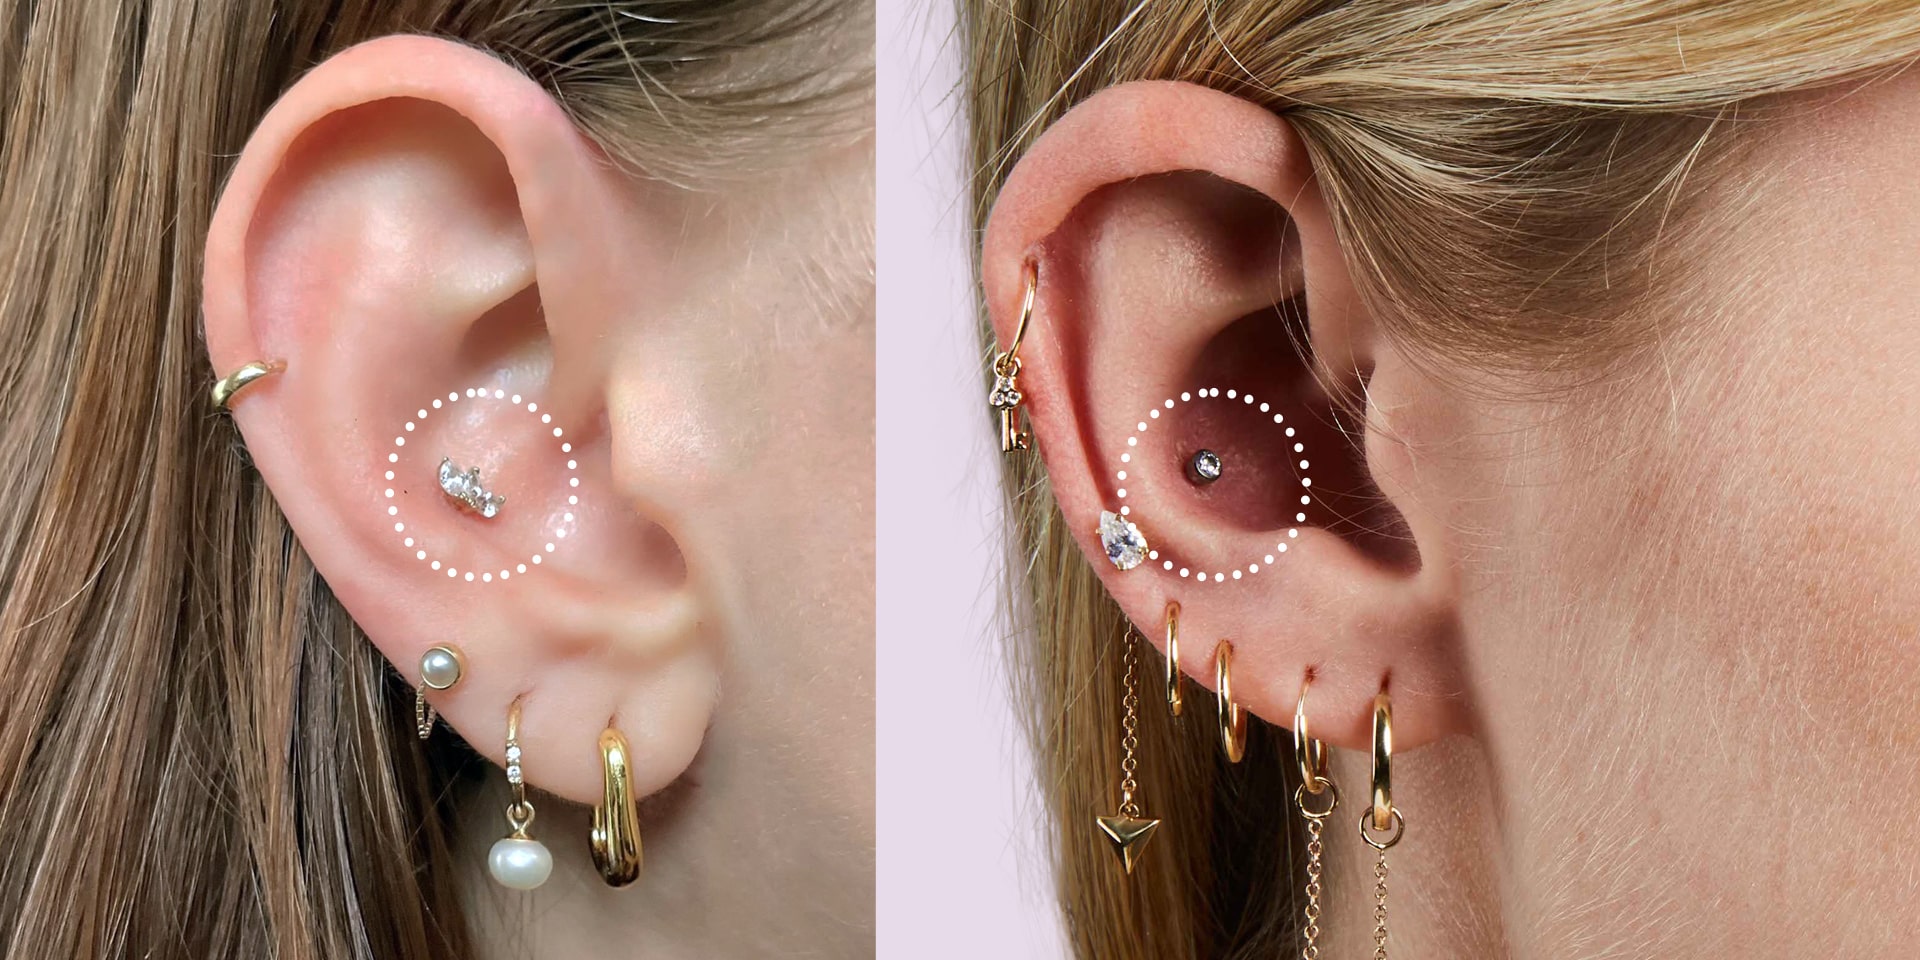 Selecting the Right Conch Piercing Jewelry | UrbanBodyJewelry.com